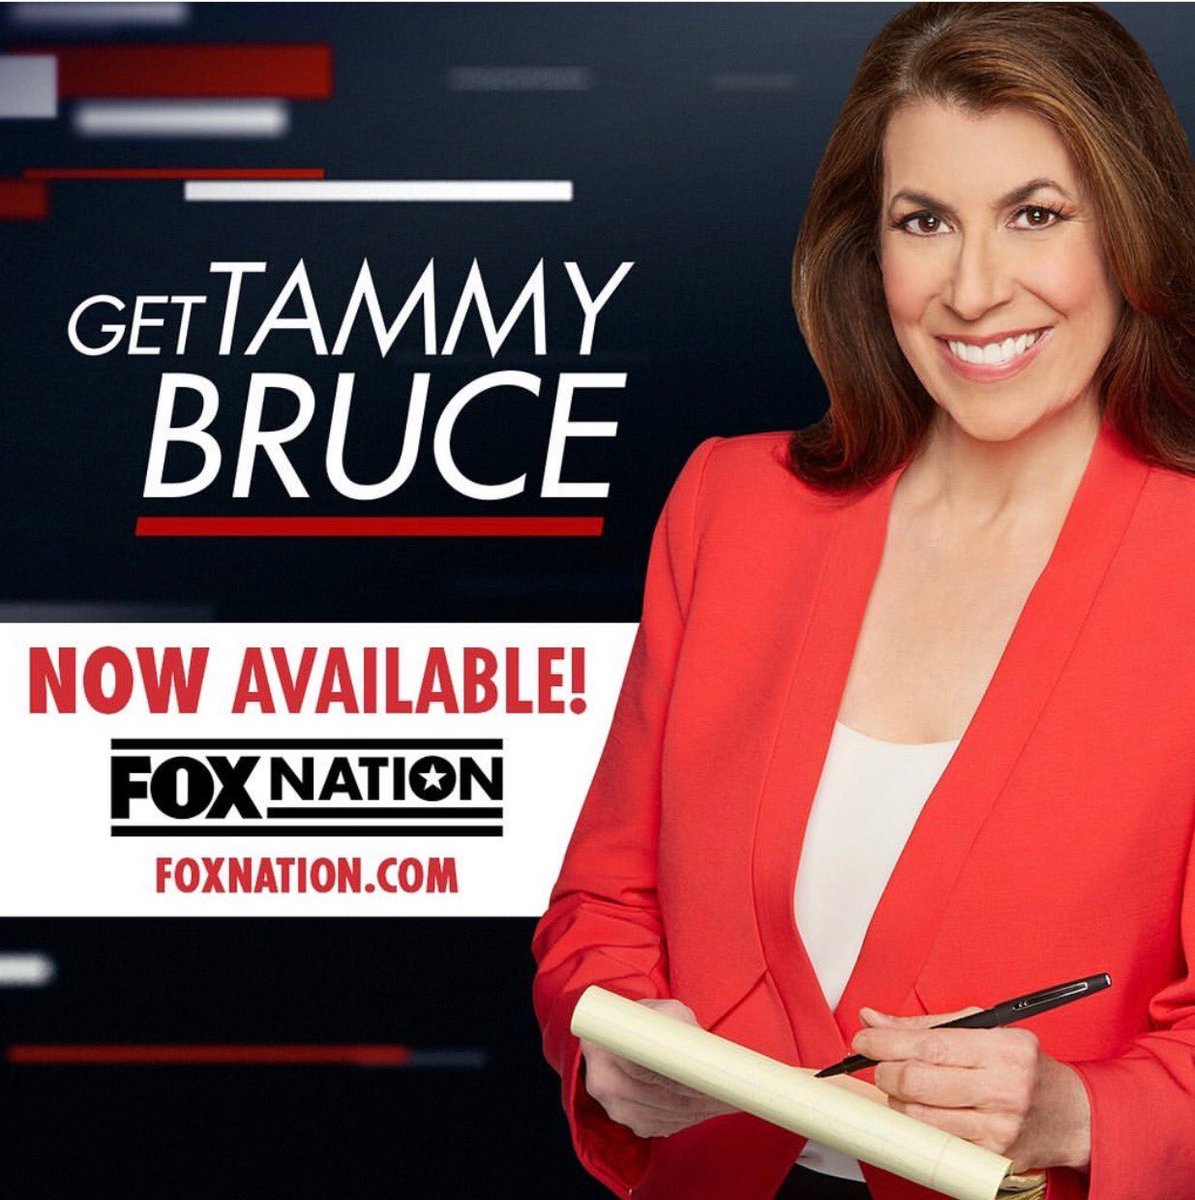 Next week on #FoxNation’s "Get Tammy Bruce" it’s your turn! 